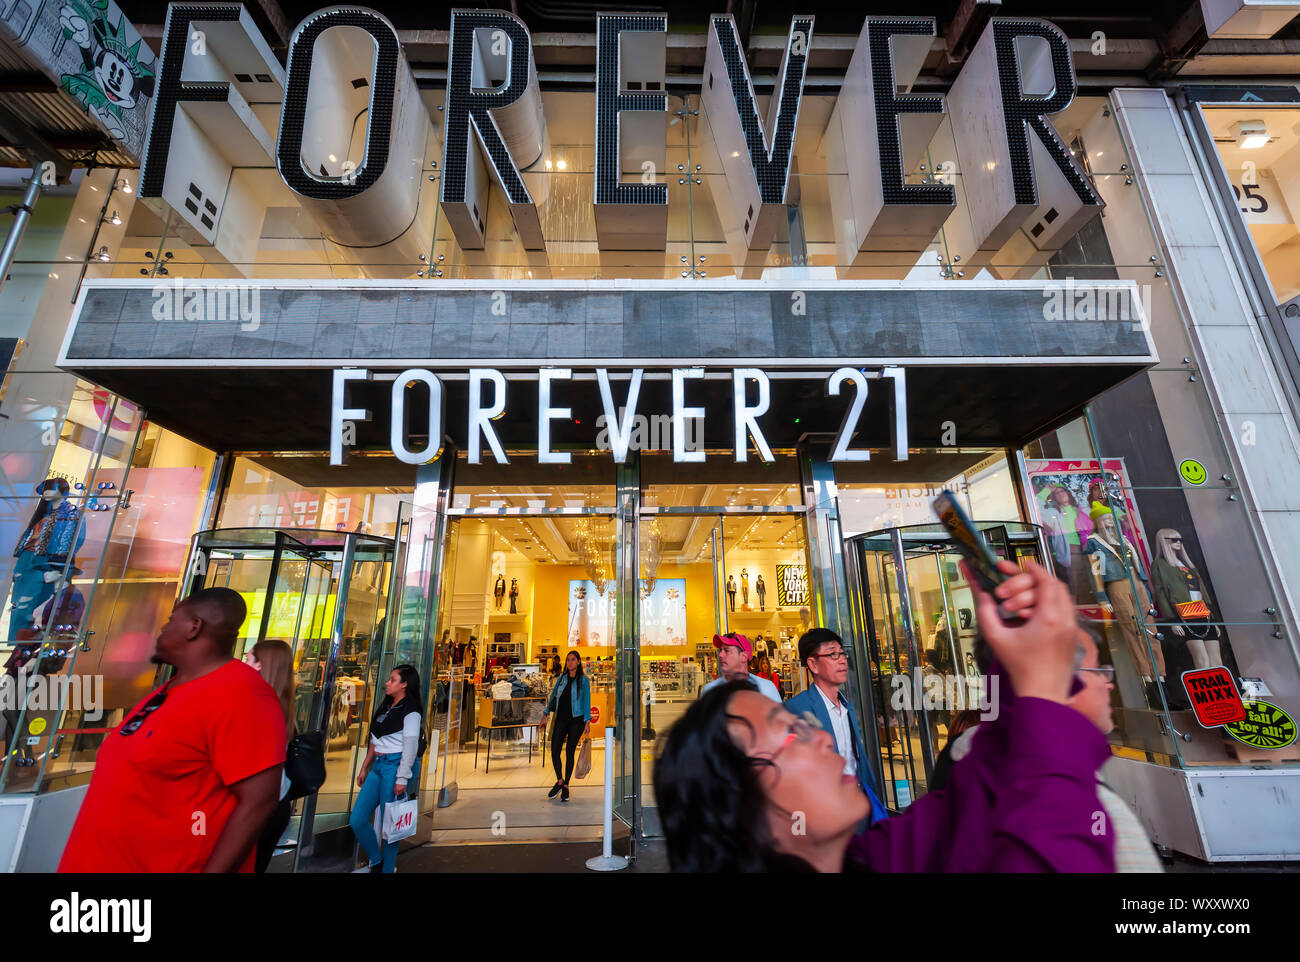 Forever 21 (Time Square) in New York: 2 reviews and 9 photos